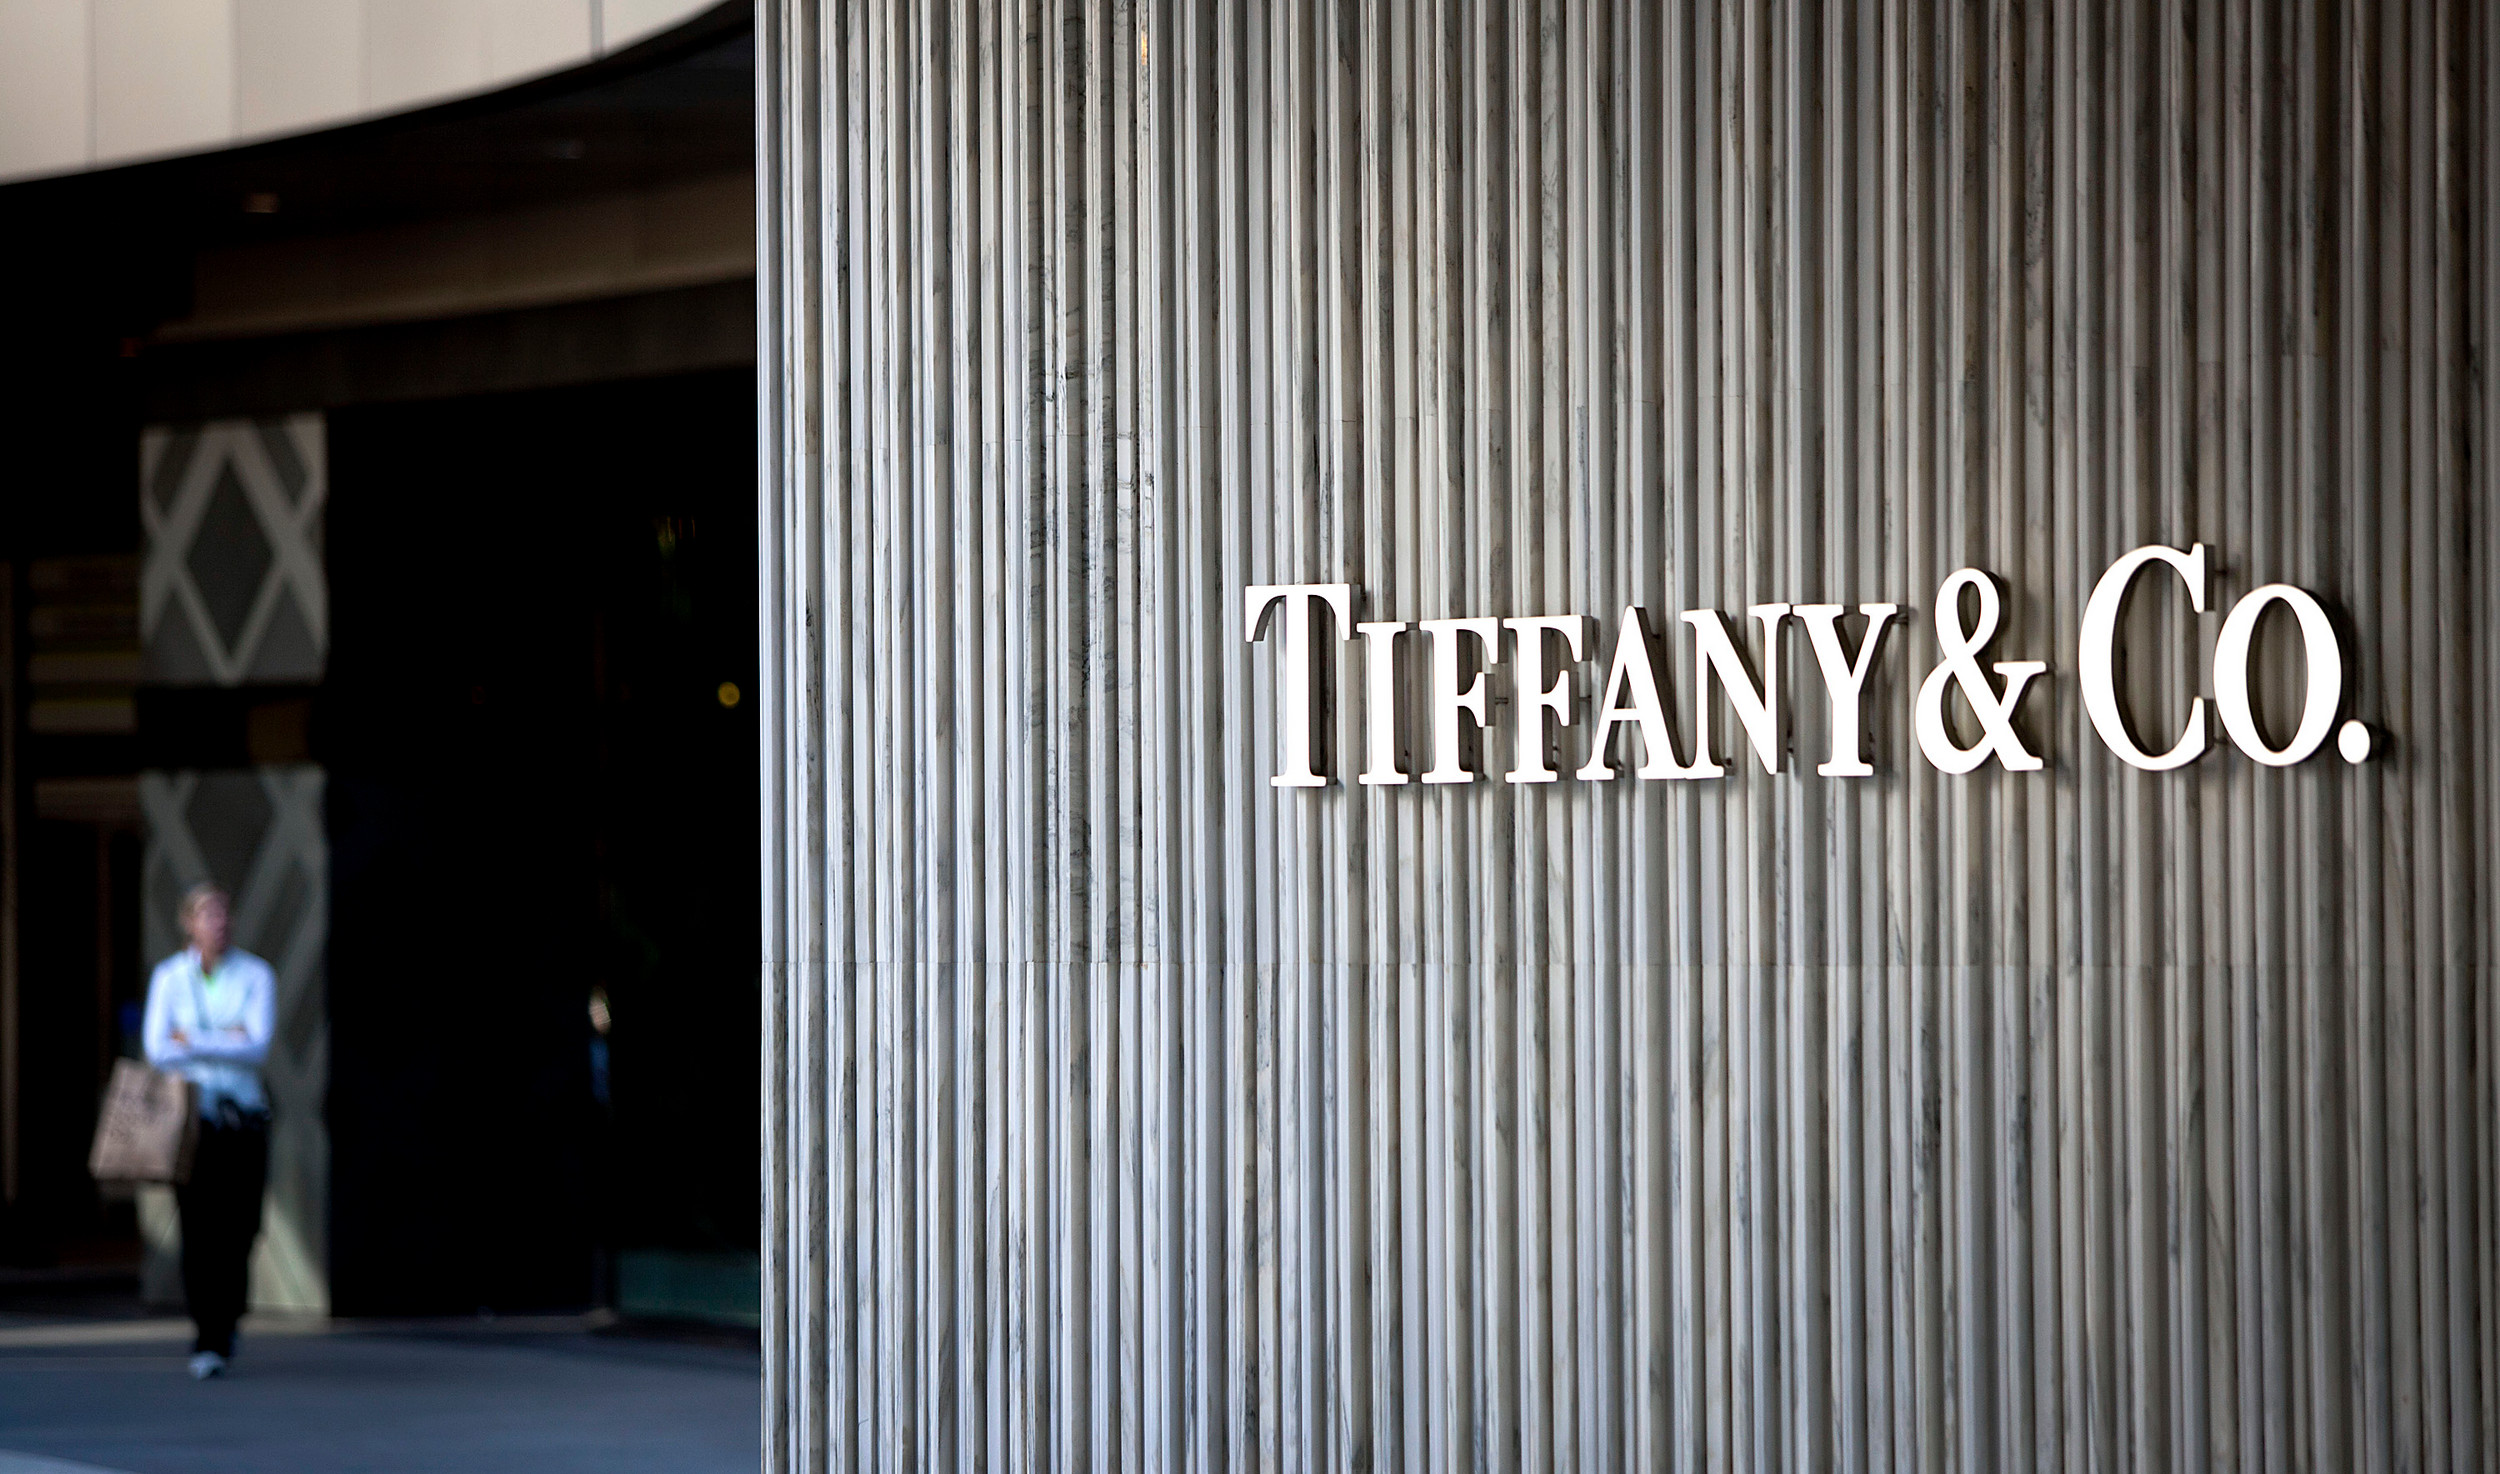 LVMH Makes Unsolicited $14.5 Billion Bid For Tiffany - Retail TouchPoints